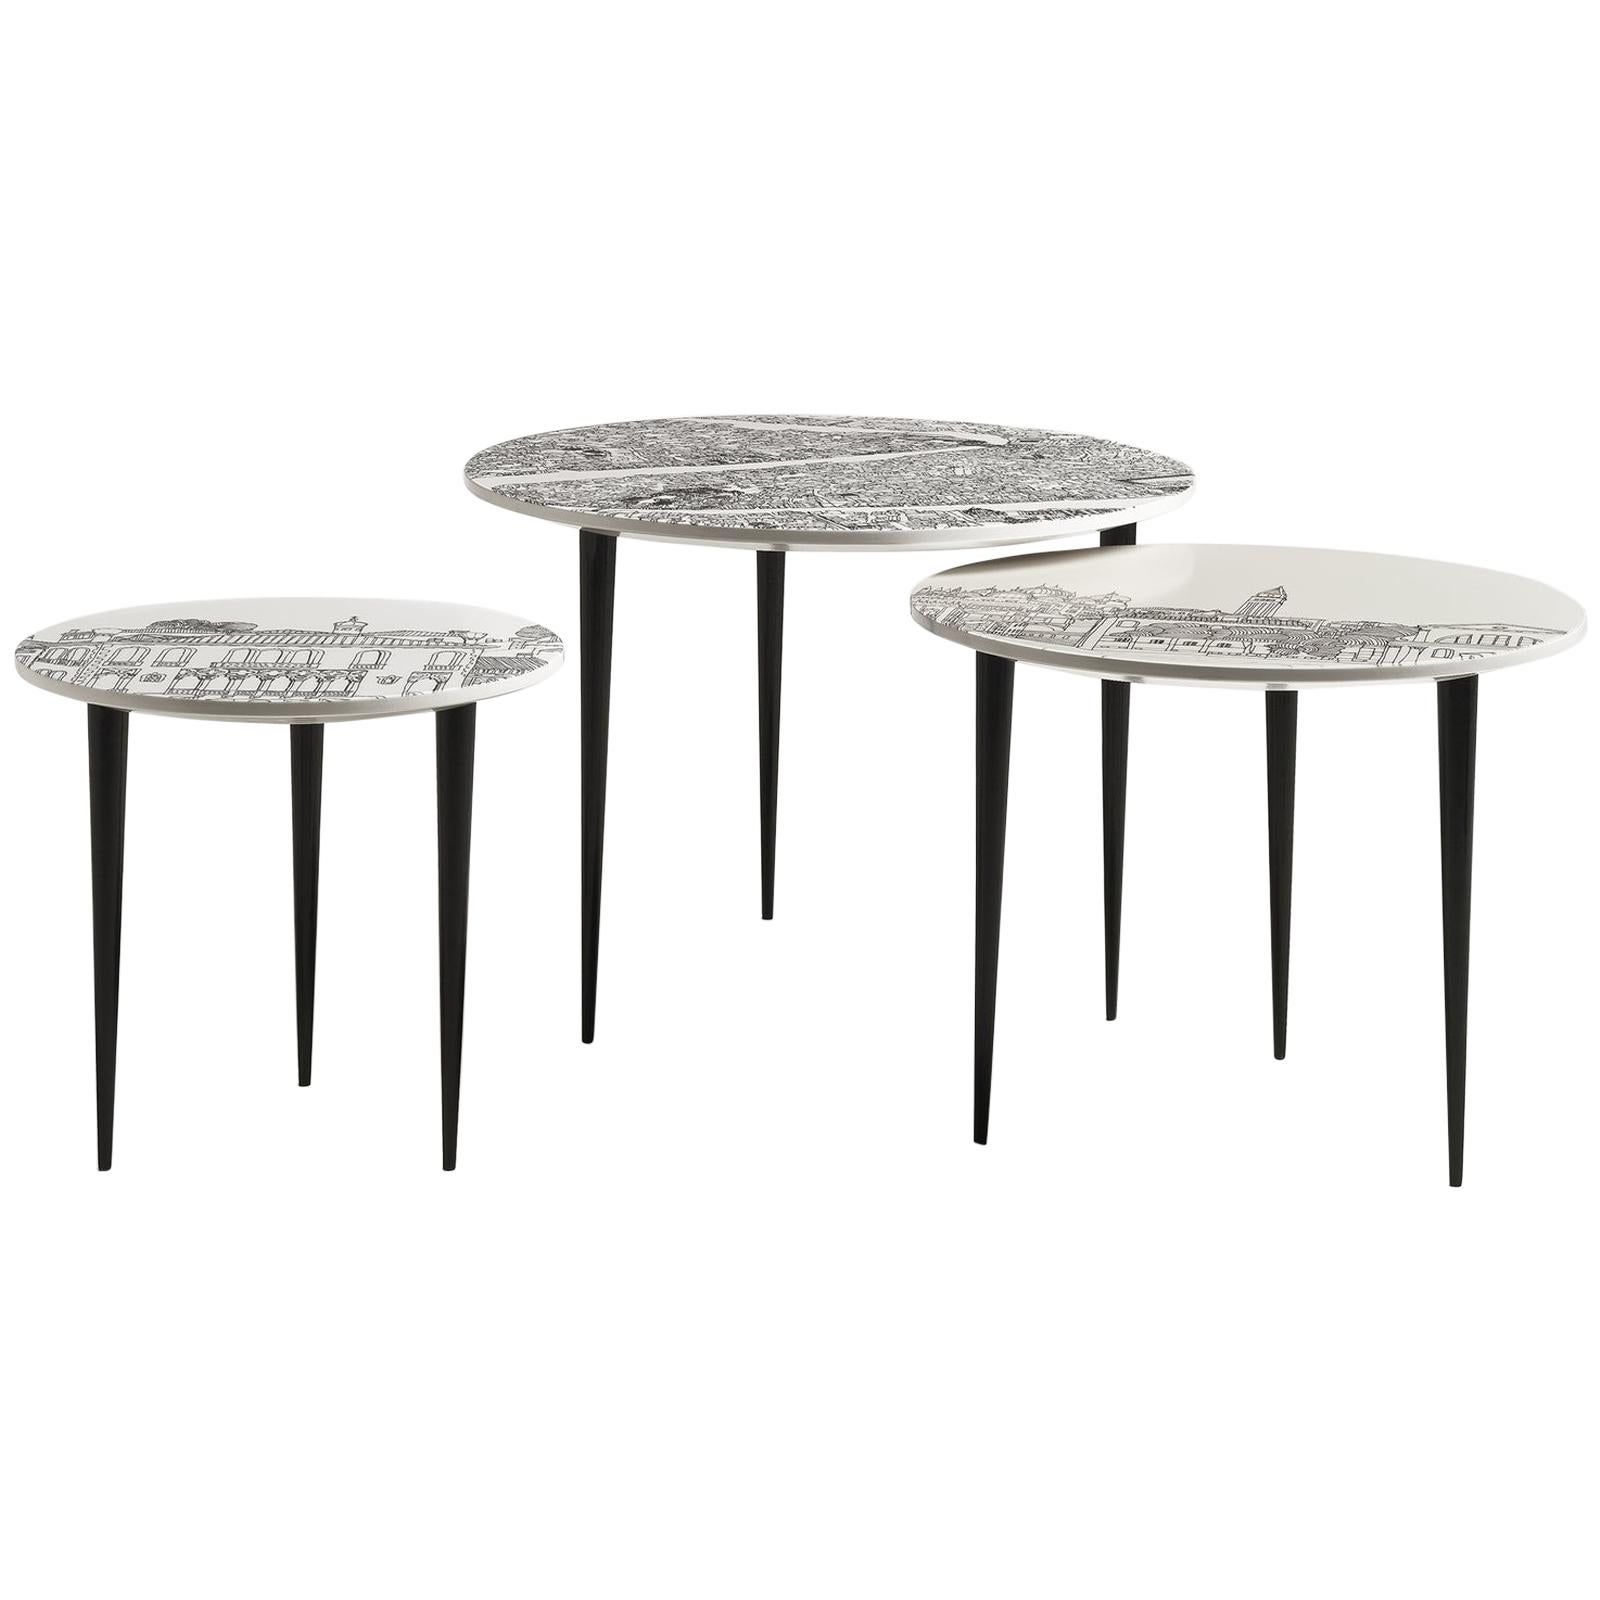 The 3-table set of the Venezia series designed by Anna Sutor represents a close look at the iconic landscapes of this Italian city depicted in their essence. Inspired by a series of small tables by great designer Aldo Tura, these modern-style tables